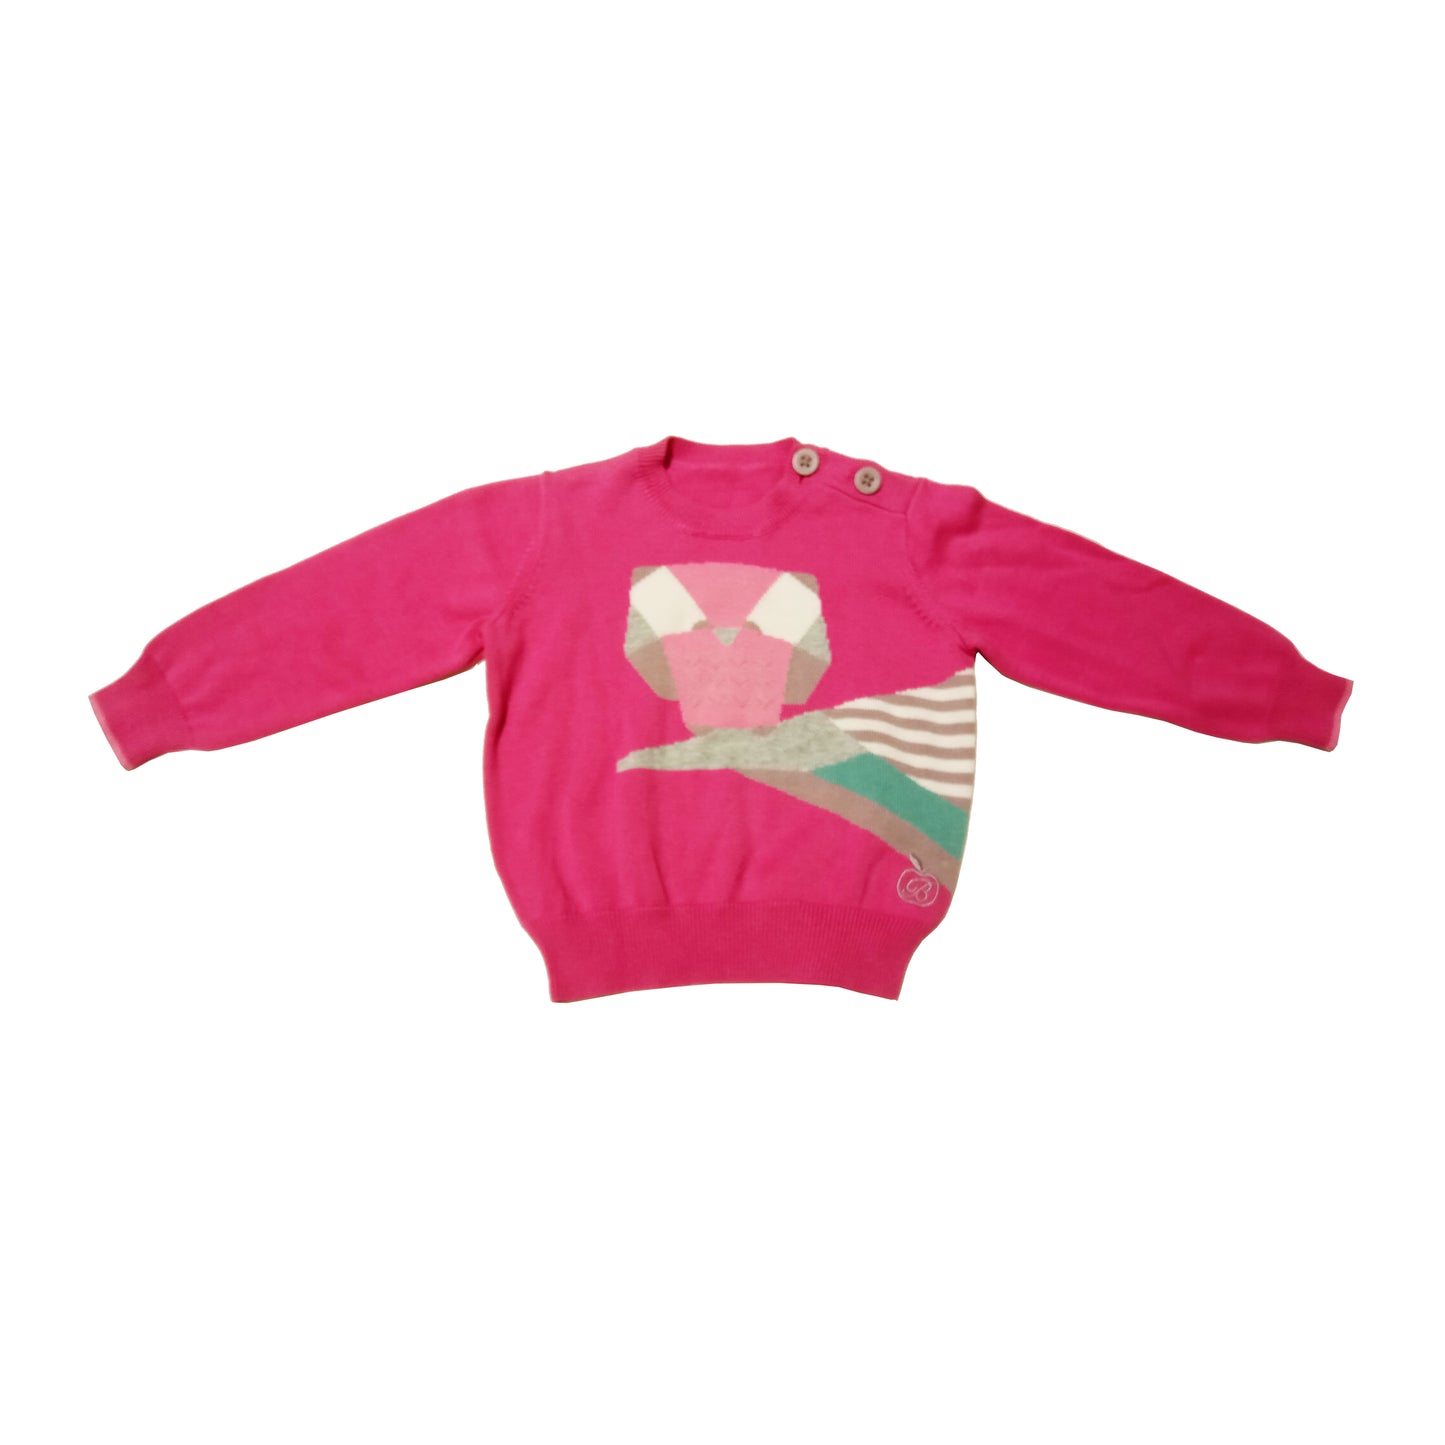 SWEATER - BABY - PINK - DONNY